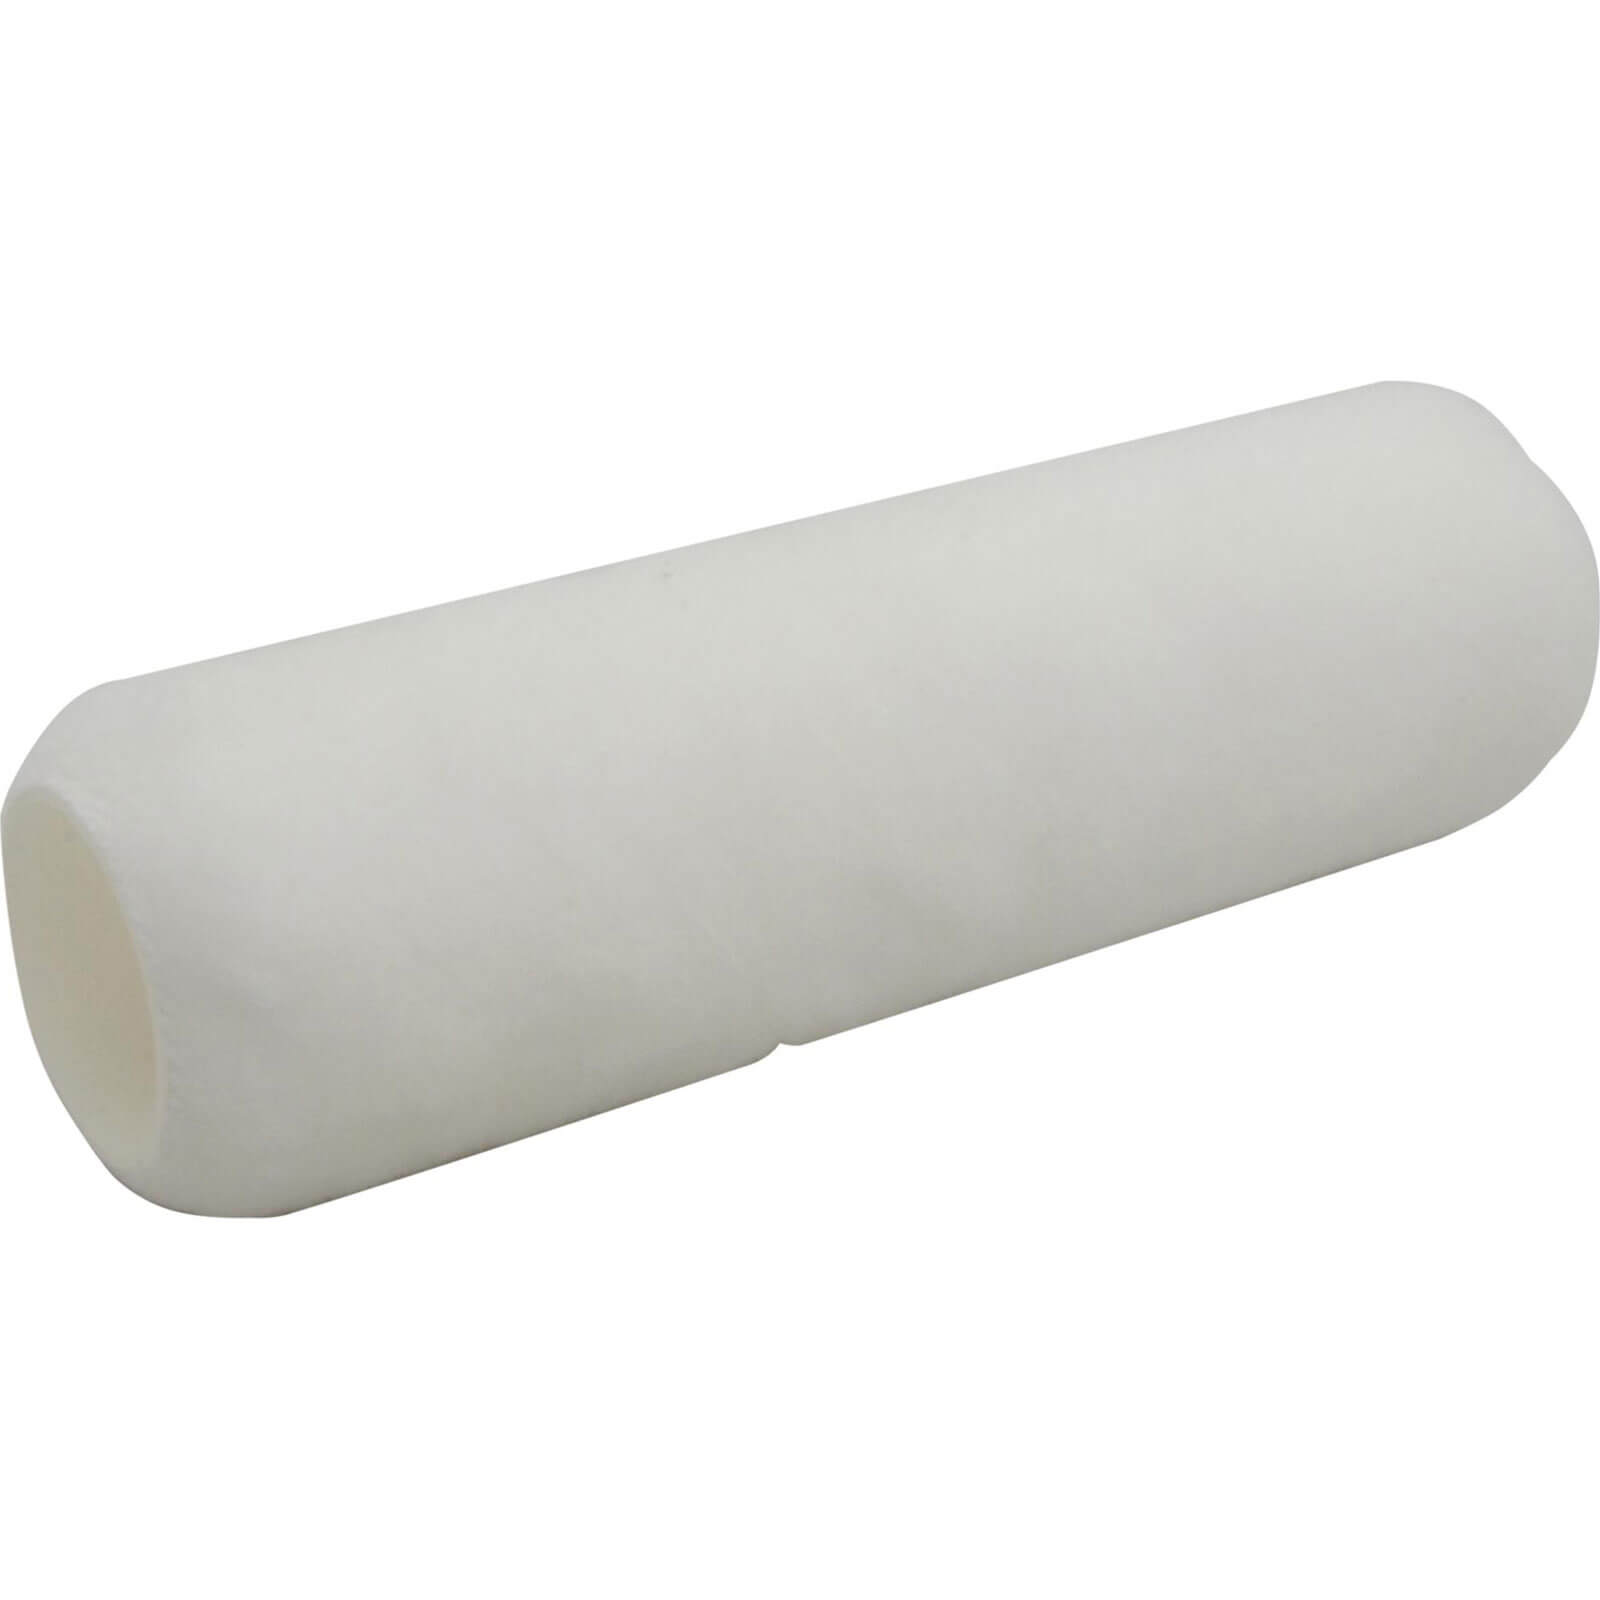 Image of Purdy Pro Extra White Dove Paint Roller Refill Sleeve 44mm 228mm Pack of 1